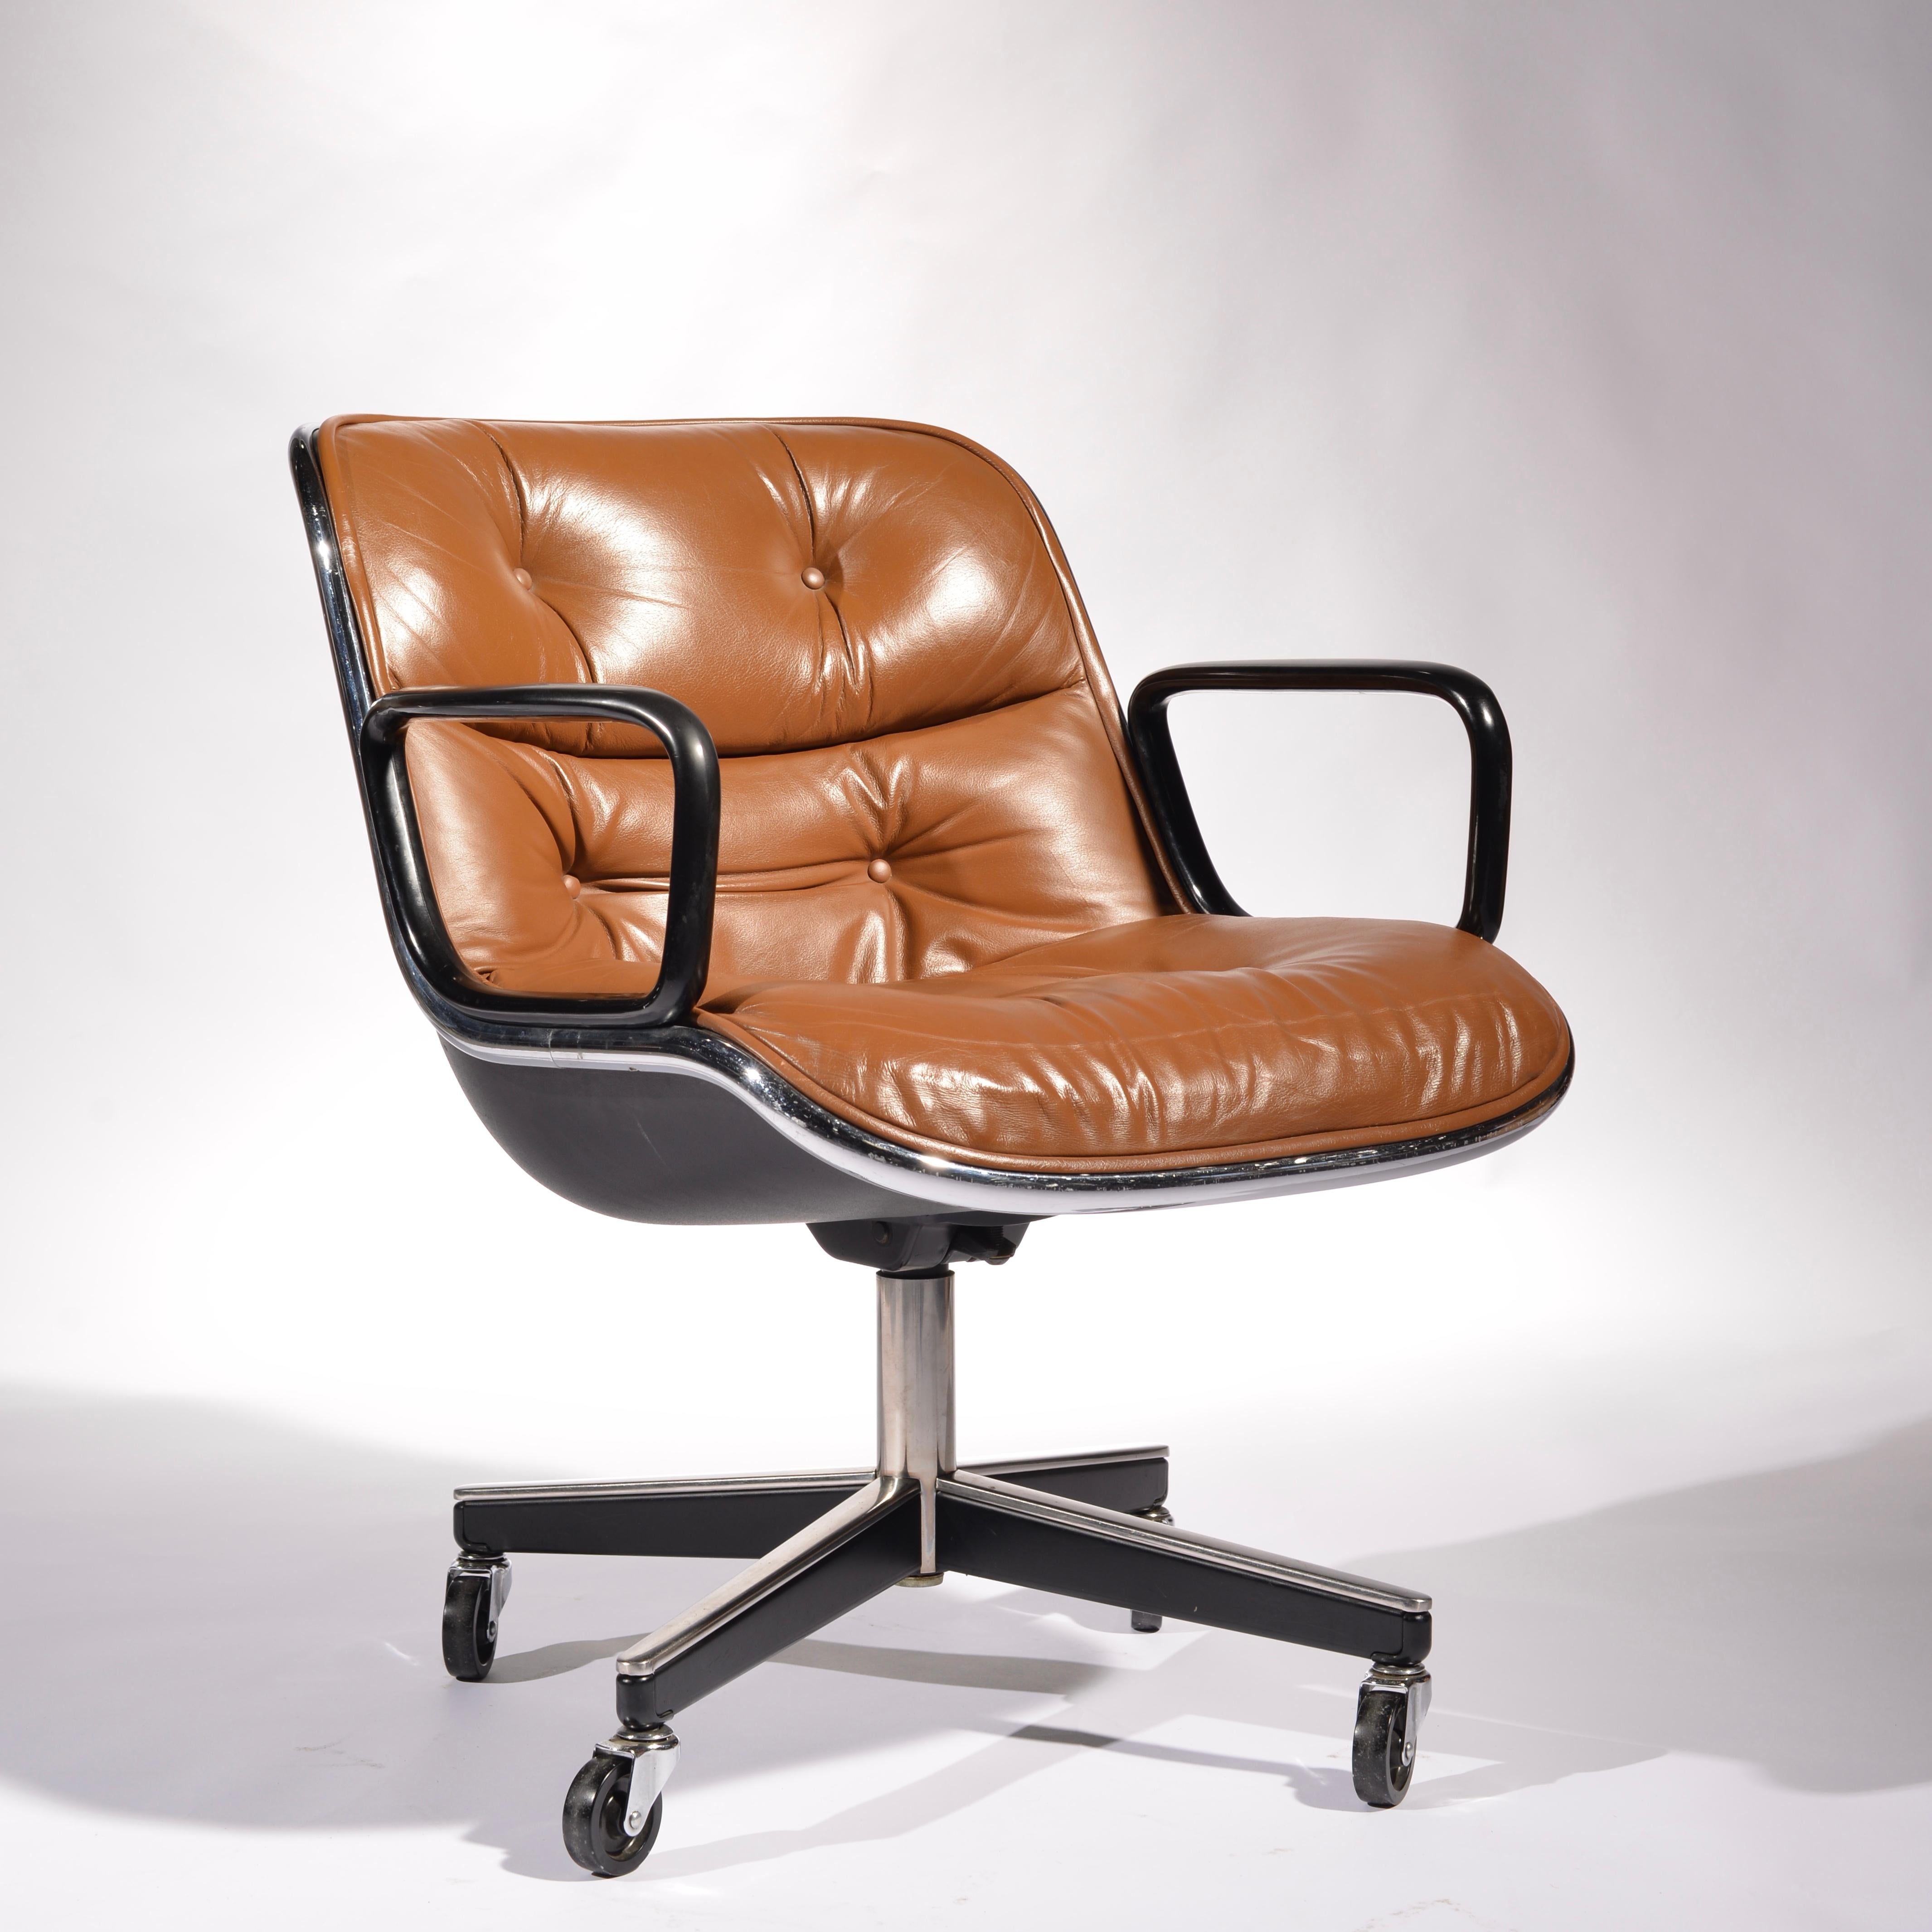 Mid-20th Century Charles Pollock Executive Desk Chairs for Knoll in Cognac Leather